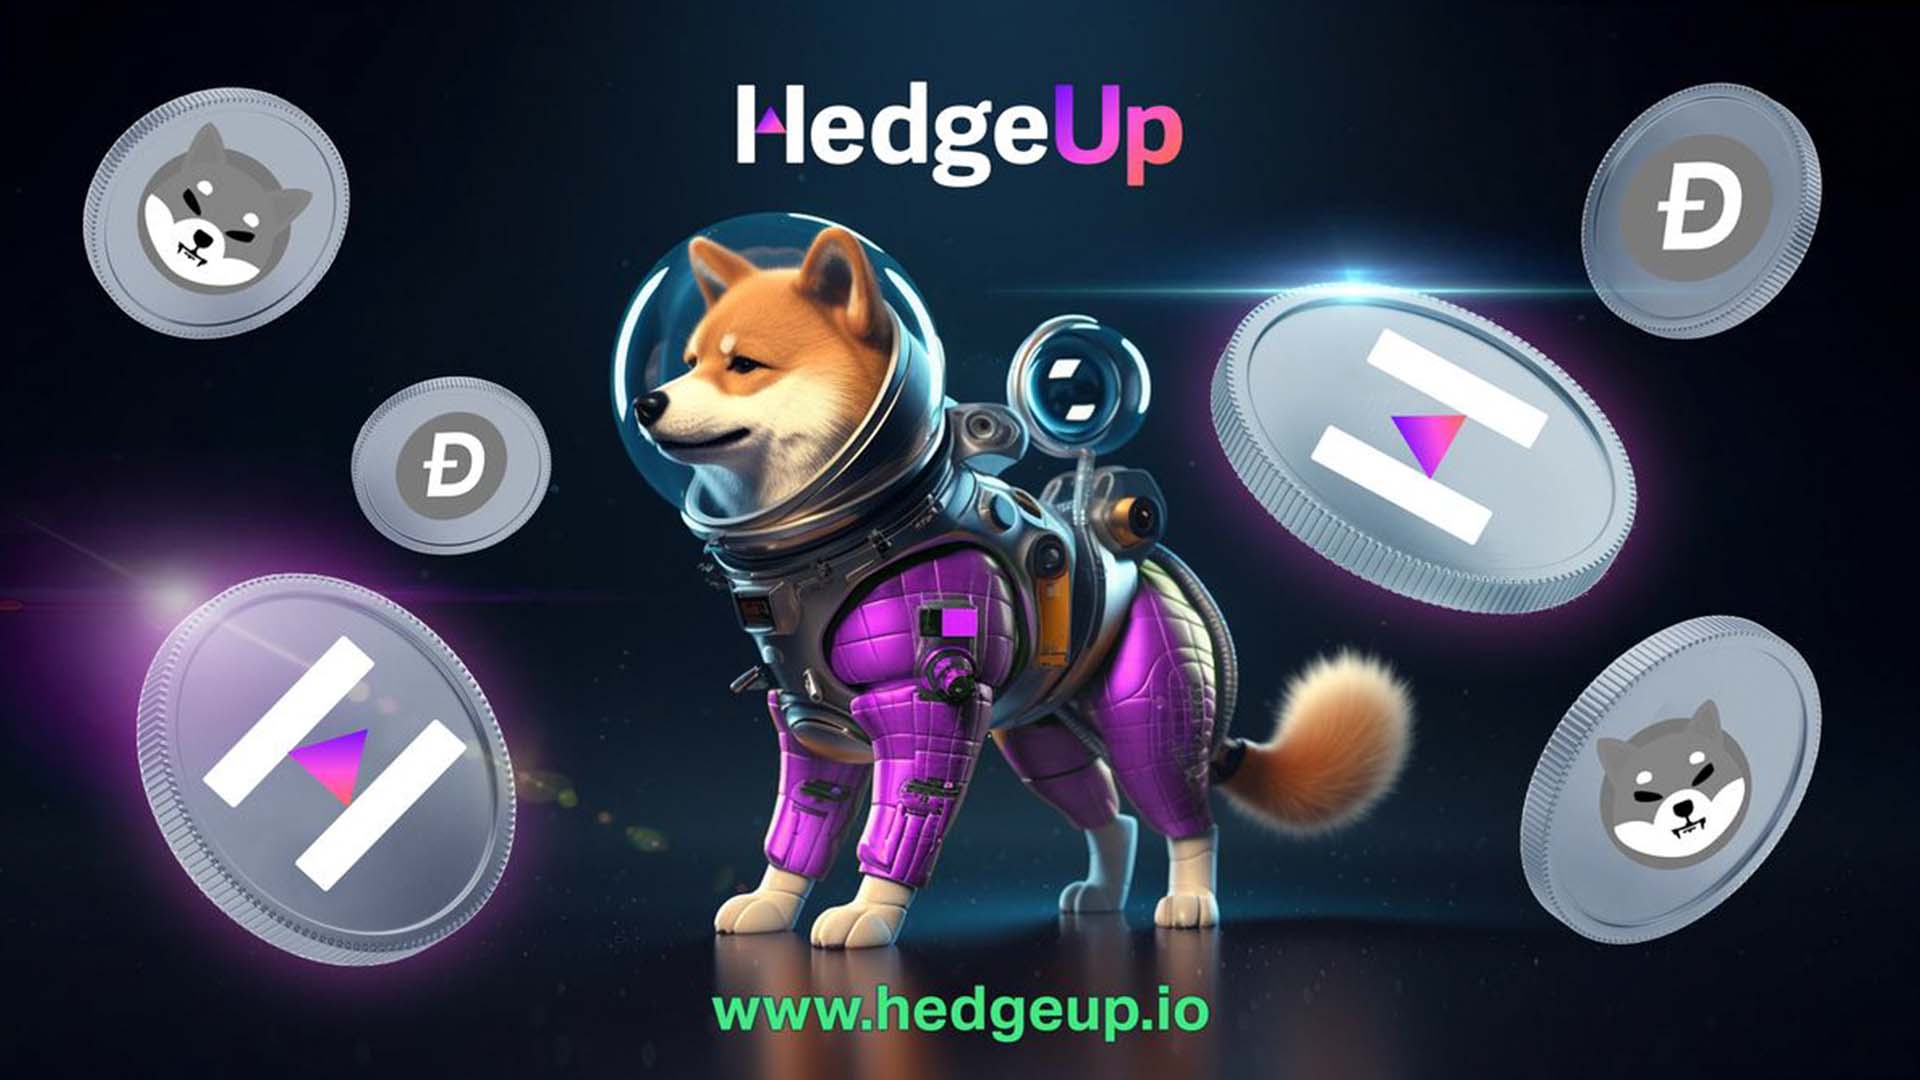 Shiba Inu ShibaSwap Launches Revolutionary Features, HedgeUp Attracts SHIB Holders for DeFi